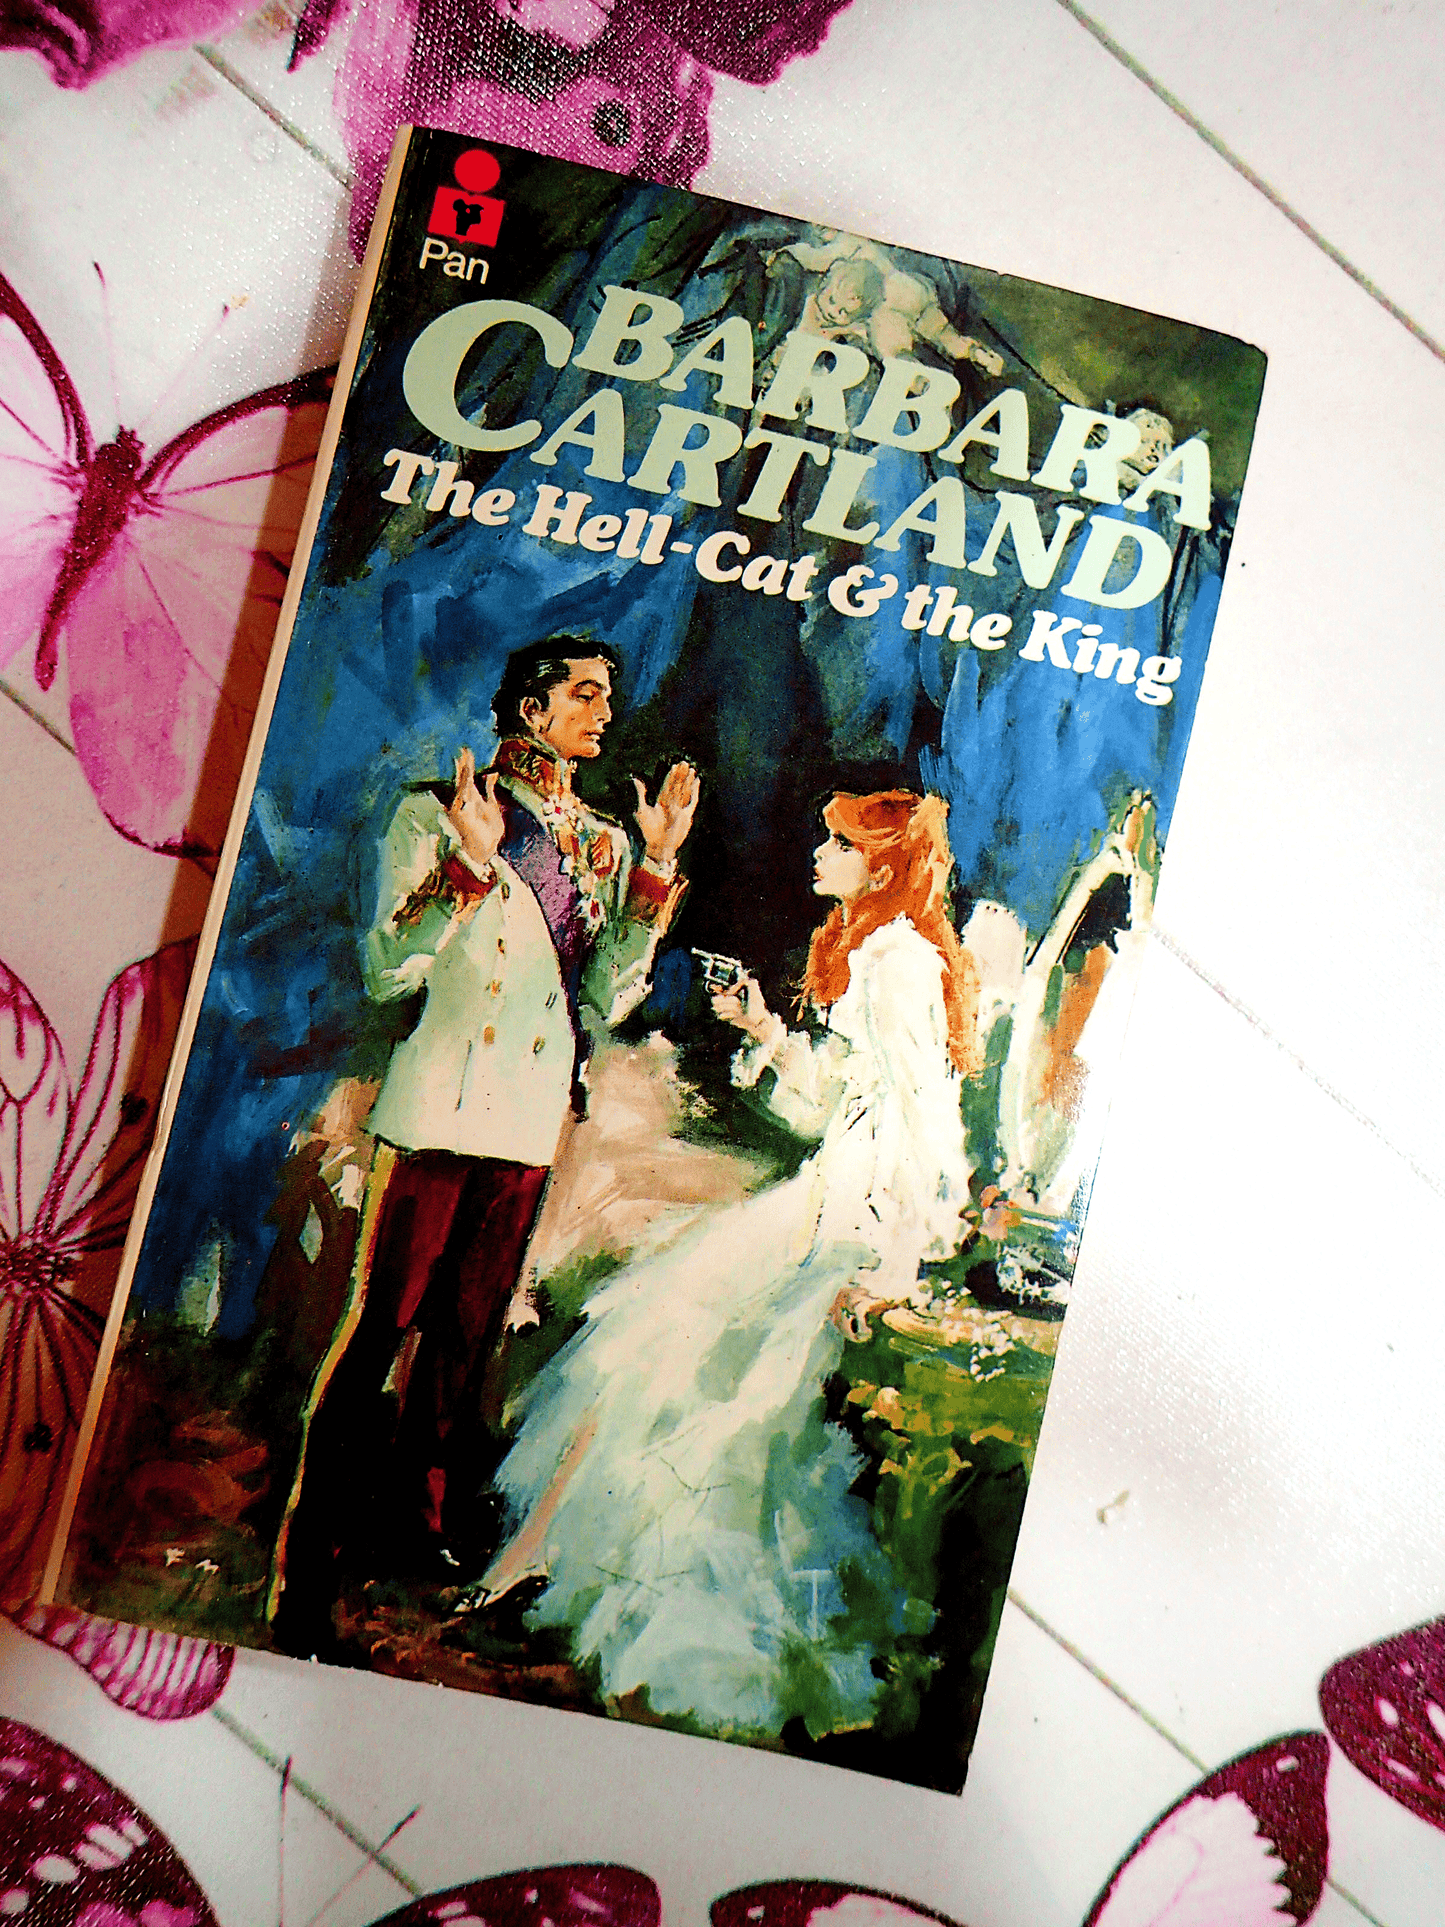 Cover of The Hell Cat and the King Barbara Cartland Pan Paperback First Edition showing a red haired woman pointing a gun at a handsome aristocrat. 